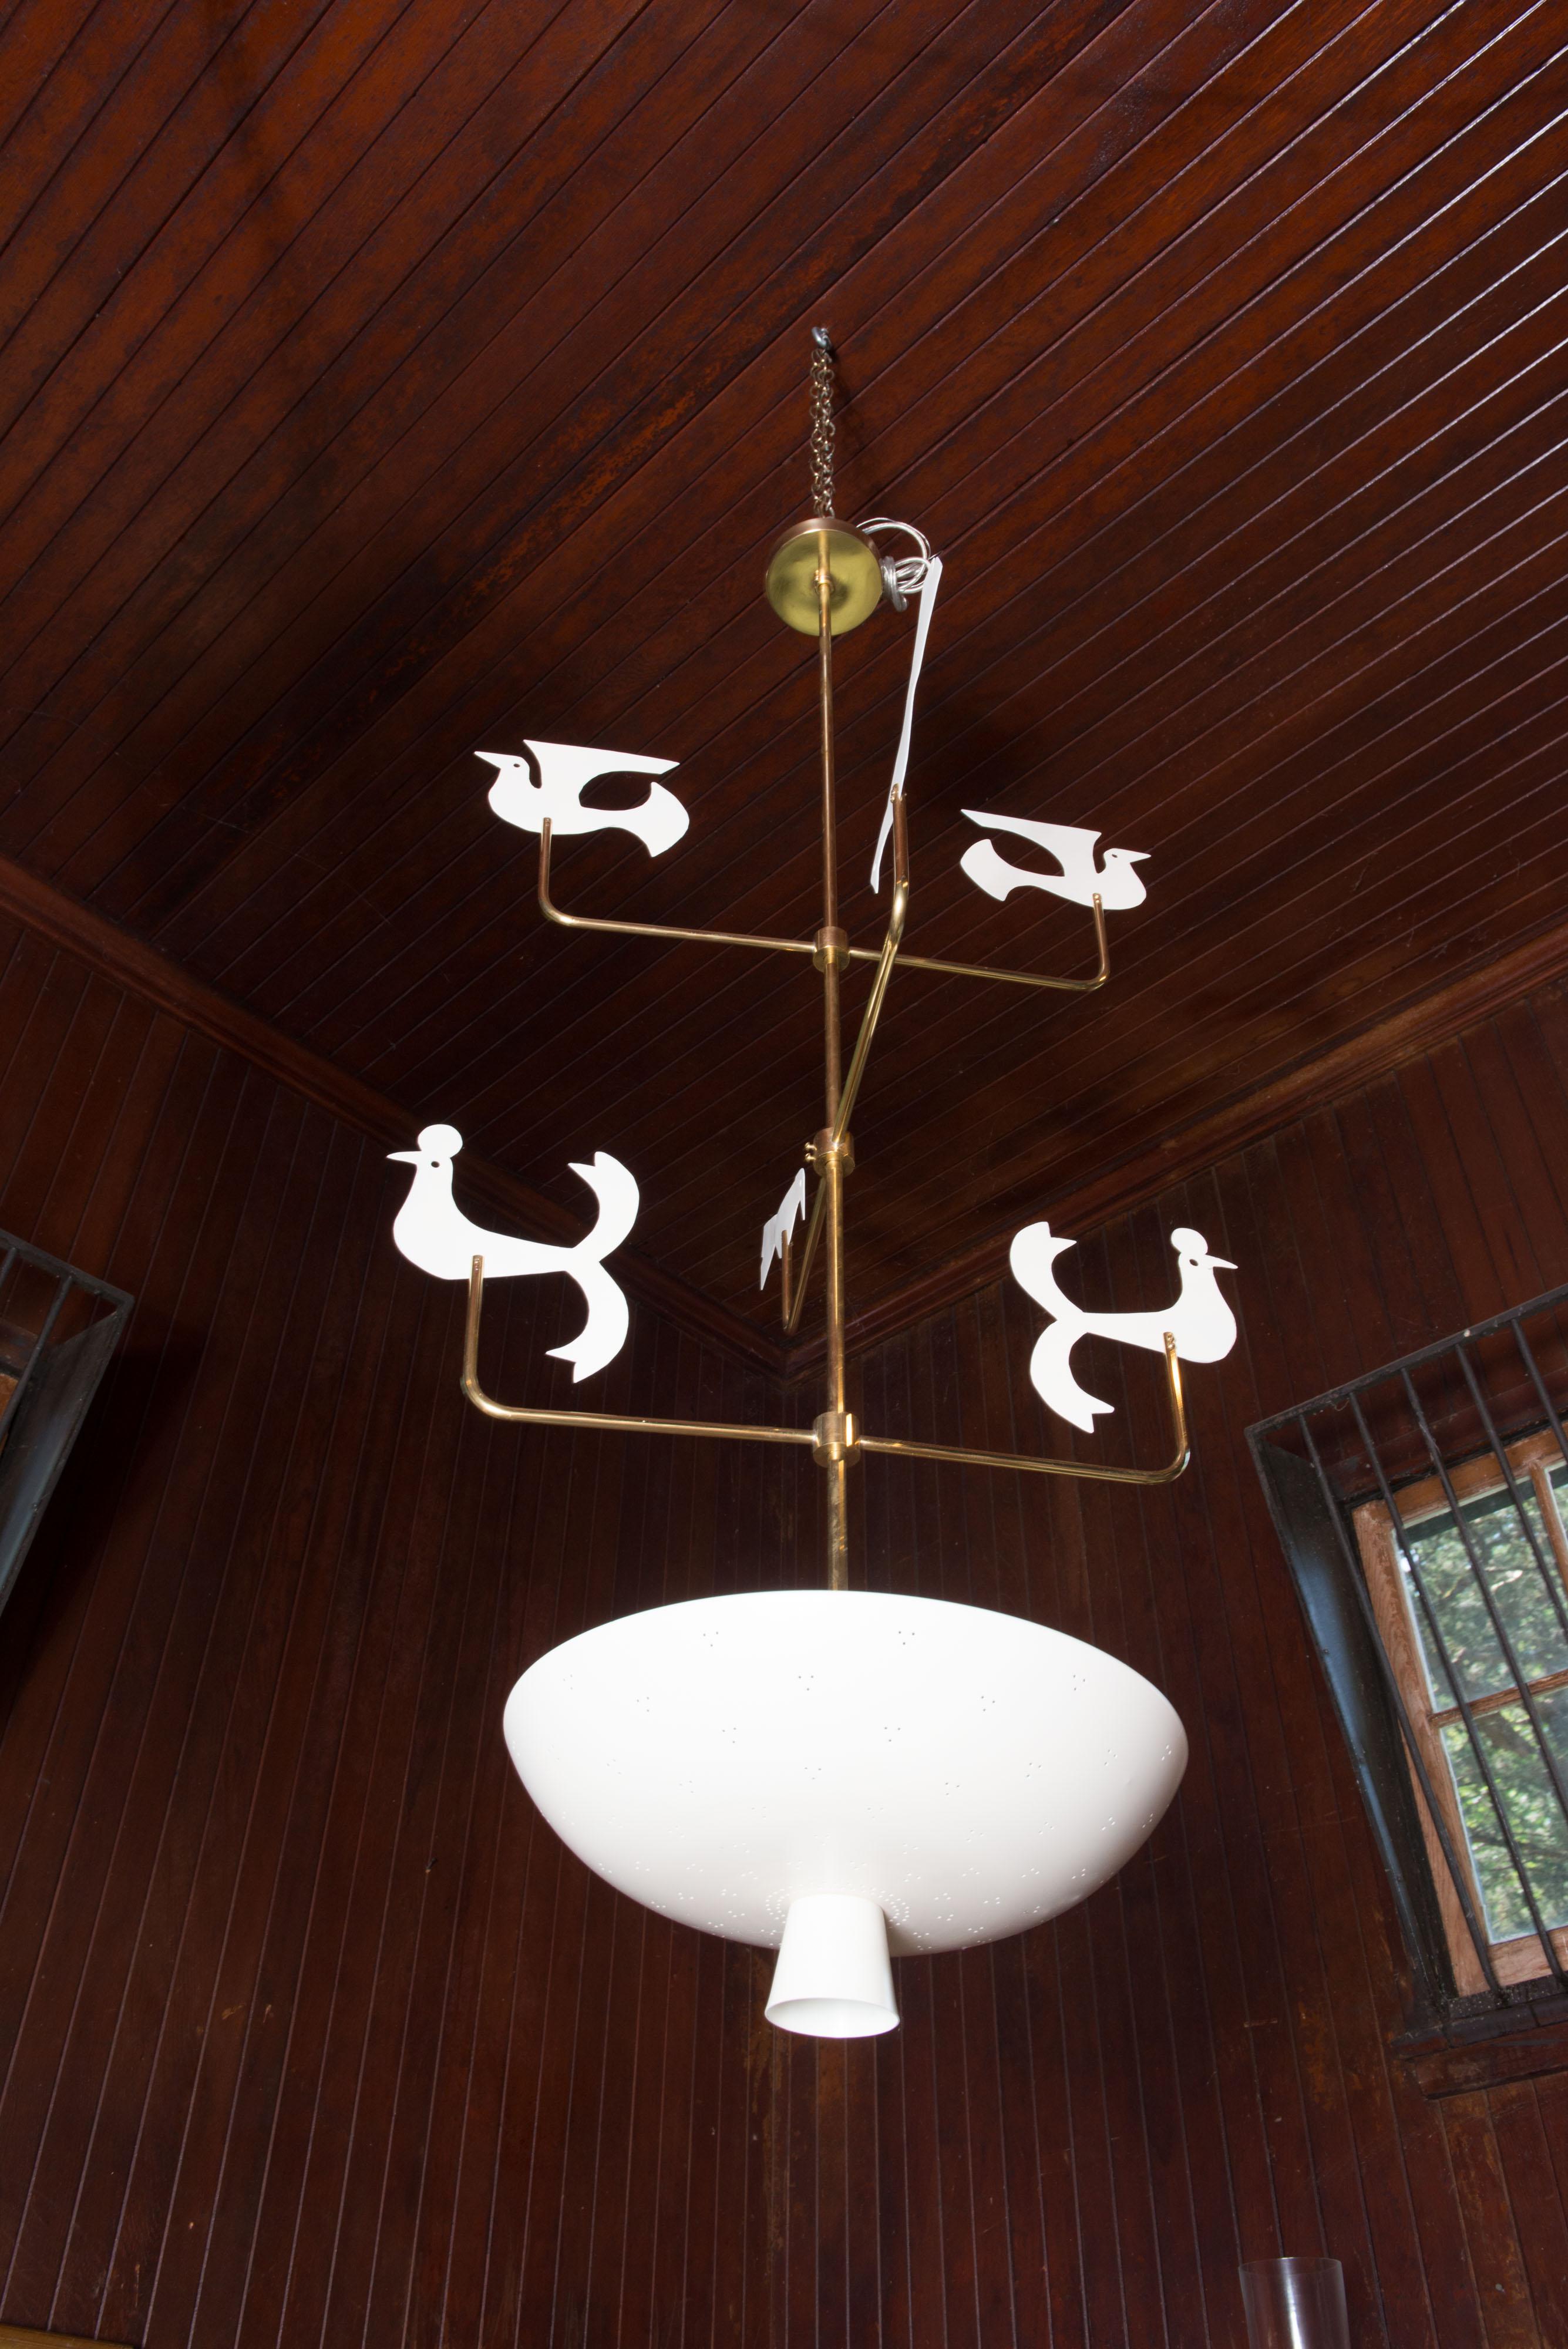 This is a spectacular custom handcrafted Tommi Parzinger inspired whimsical bird chandelier. The sleek white enameled aluminum pierced shallow bowl shaped light fixture contains three standard light bulb sockets. Above the lighted bowl is a long